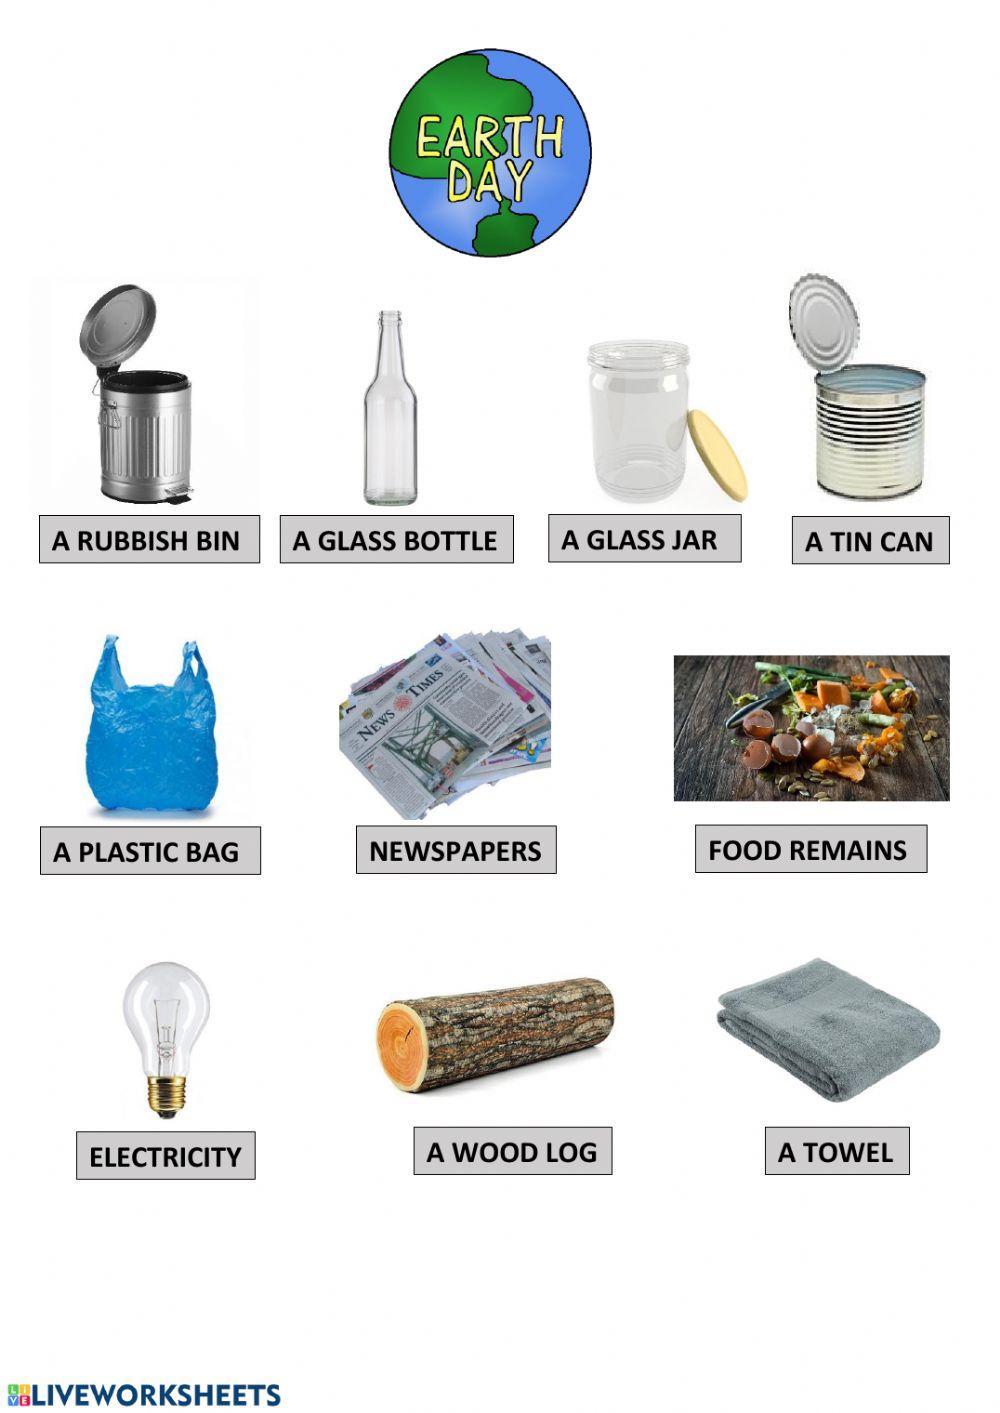 Earth Day vocabulary